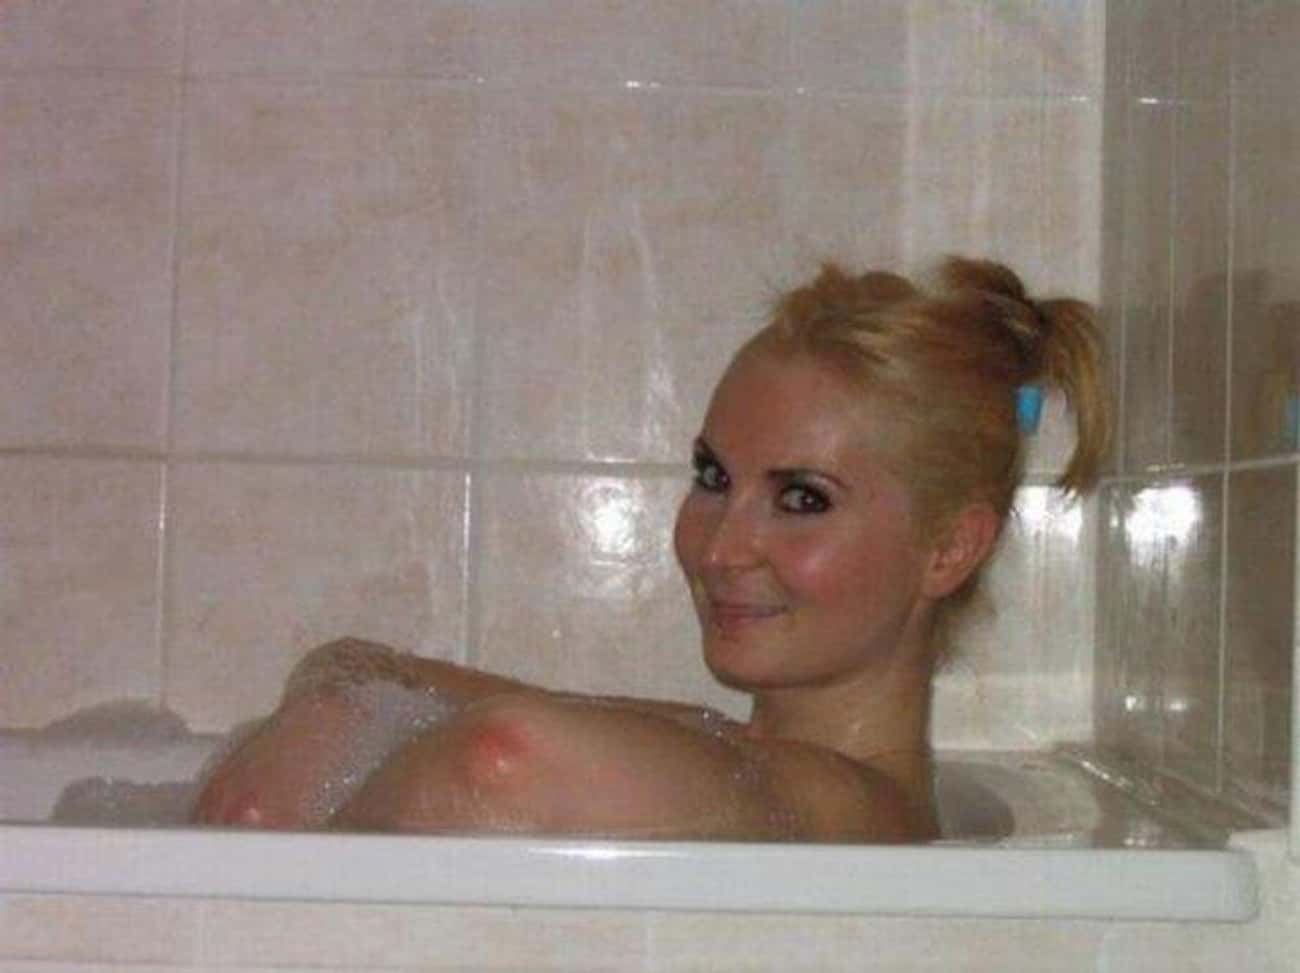 Innocent Pics that seem dirty - x rated fails